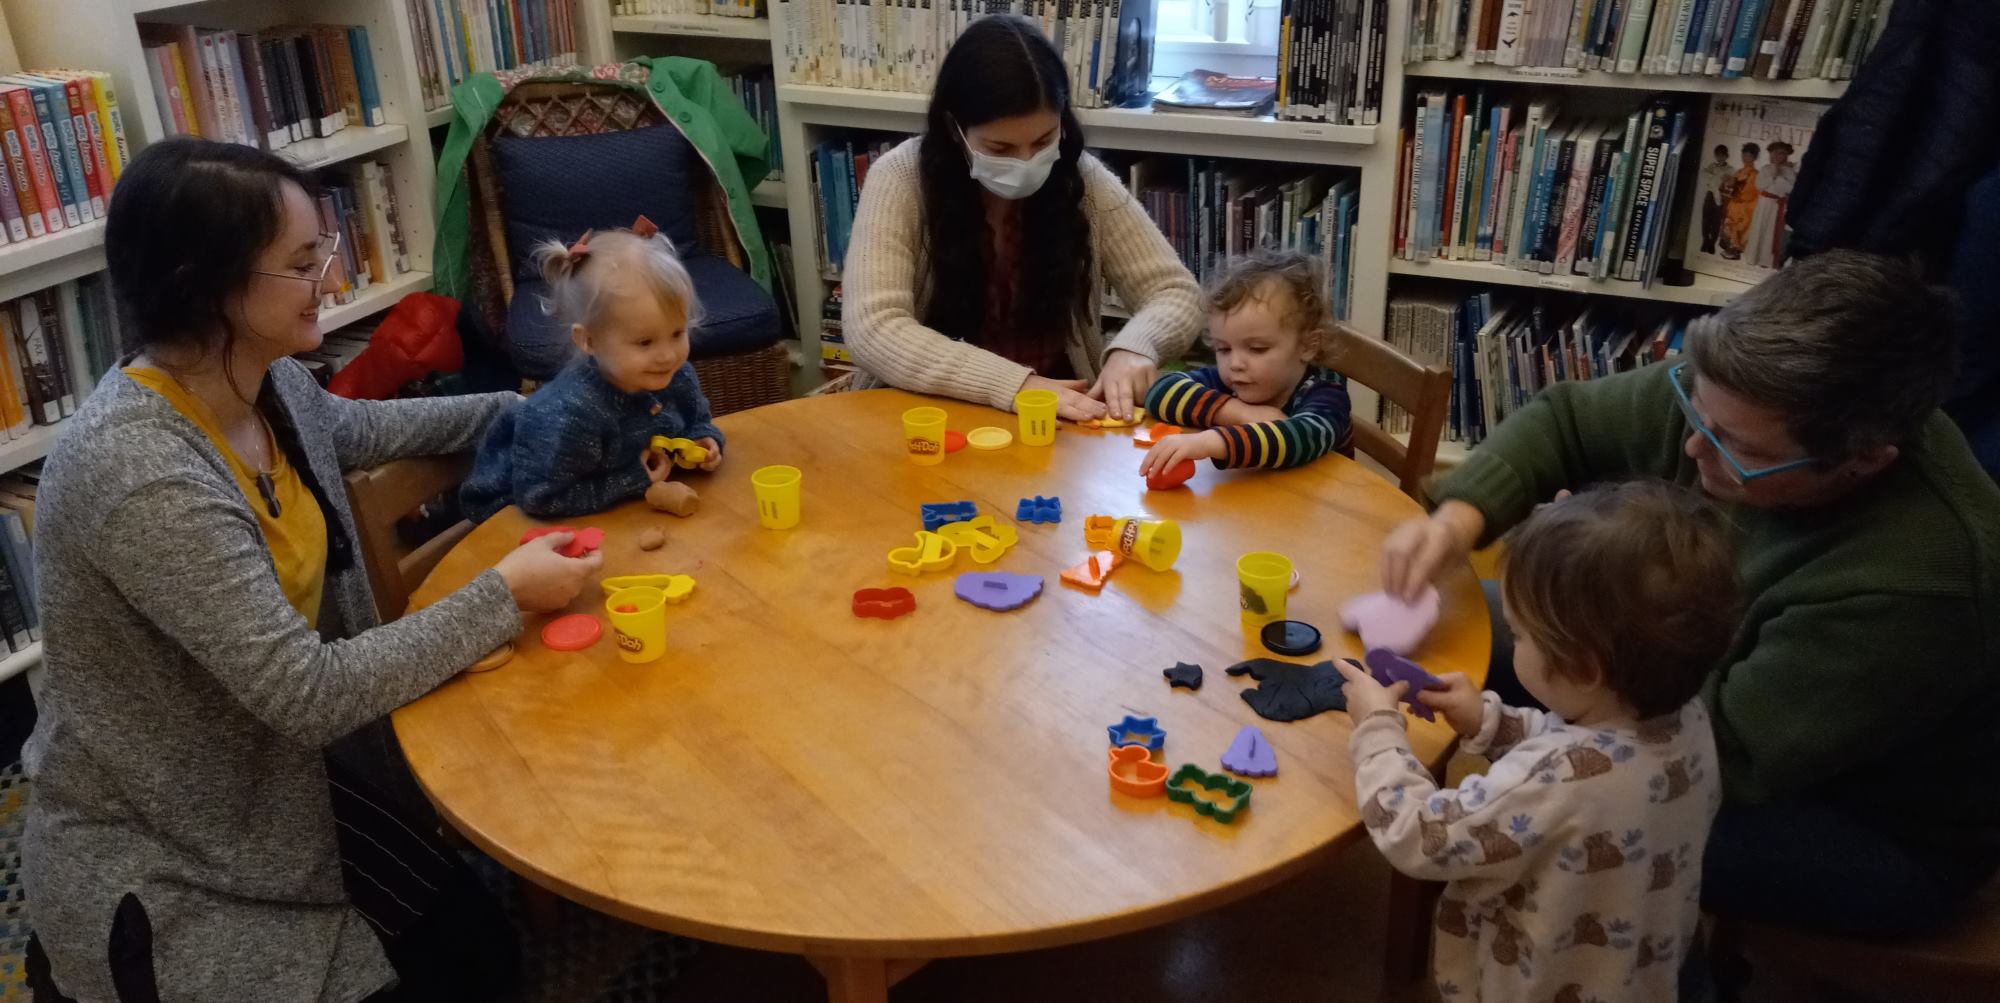 Storytime at the library, children playing with play-doh